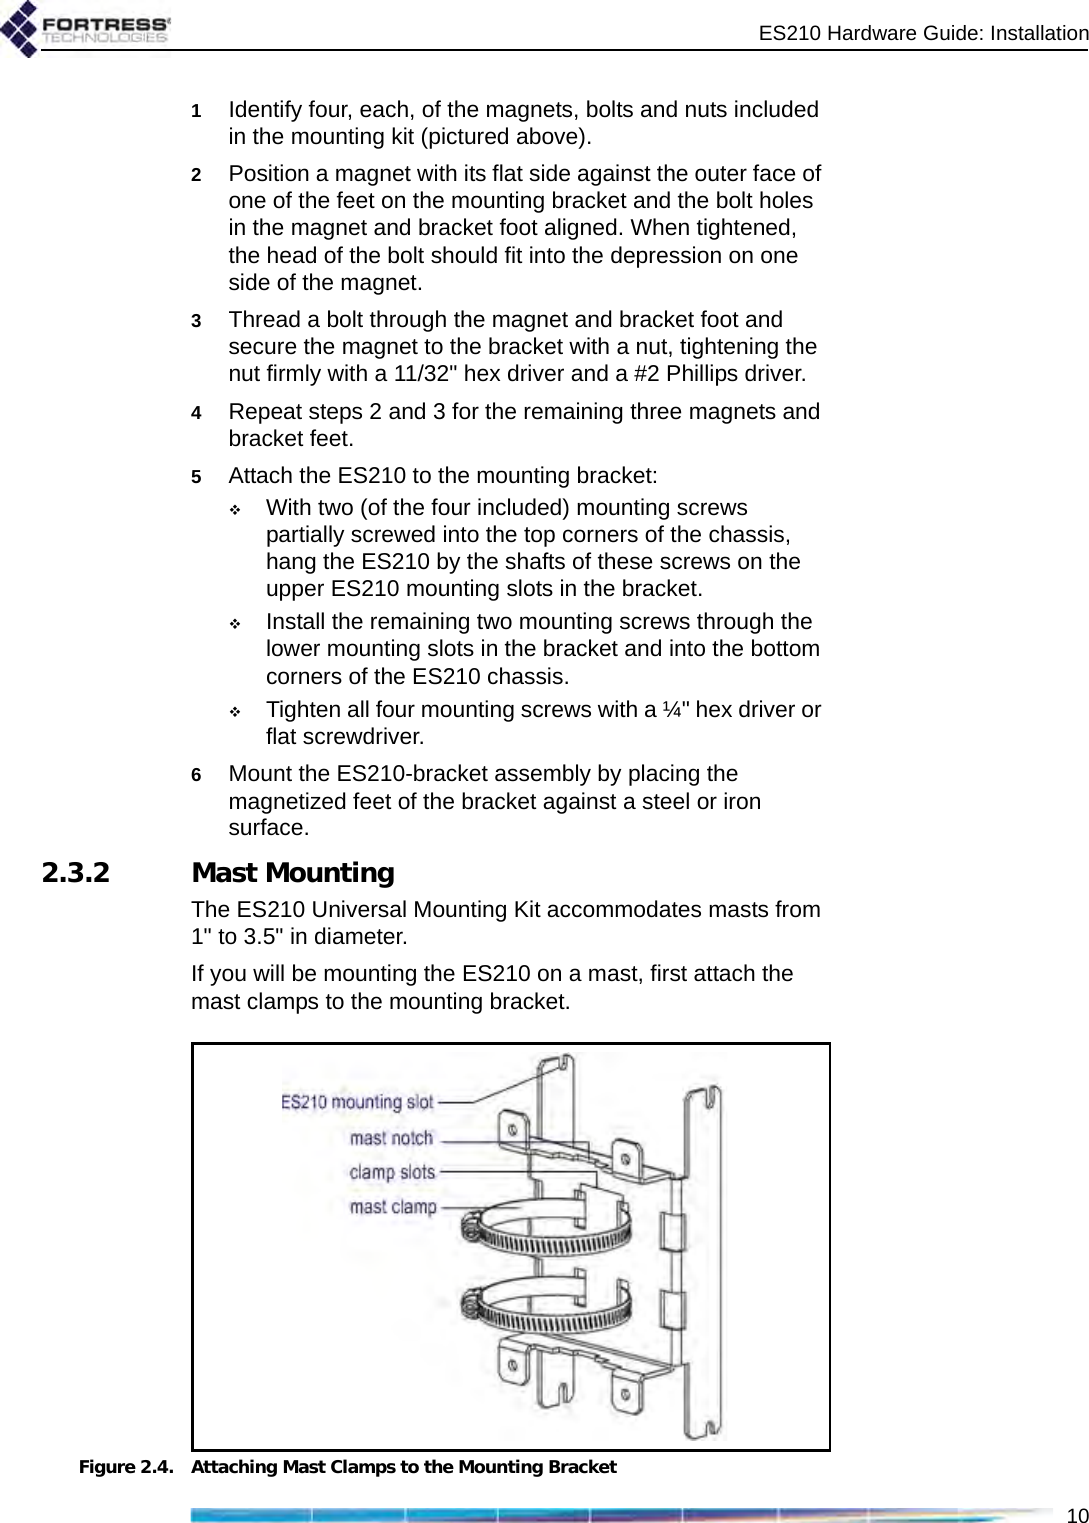 ES210 Hardware Guide: Installation101Identify four, each, of the magnets, bolts and nuts included in the mounting kit (pictured above).2Position a magnet with its flat side against the outer face of one of the feet on the mounting bracket and the bolt holes in the magnet and bracket foot aligned. When tightened, the head of the bolt should fit into the depression on one side of the magnet.3Thread a bolt through the magnet and bracket foot and secure the magnet to the bracket with a nut, tightening the nut firmly with a 11/32&quot; hex driver and a #2 Phillips driver.4Repeat steps 2 and 3 for the remaining three magnets and bracket feet.5Attach the ES210 to the mounting bracket: With two (of the four included) mounting screws partially screwed into the top corners of the chassis, hang the ES210 by the shafts of these screws on the upper ES210 mounting slots in the bracket.Install the remaining two mounting screws through the lower mounting slots in the bracket and into the bottom corners of the ES210 chassis.Tighten all four mounting screws with a ¼&quot; hex driver or flat screwdriver.6Mount the ES210-bracket assembly by placing the magnetized feet of the bracket against a steel or iron surface.2.3.2 Mast MountingThe ES210 Universal Mounting Kit accommodates masts from 1&quot; to 3.5&quot; in diameter.If you will be mounting the ES210 on a mast, first attach the mast clamps to the mounting bracket.Figure 2.4. Attaching Mast Clamps to the Mounting Bracket